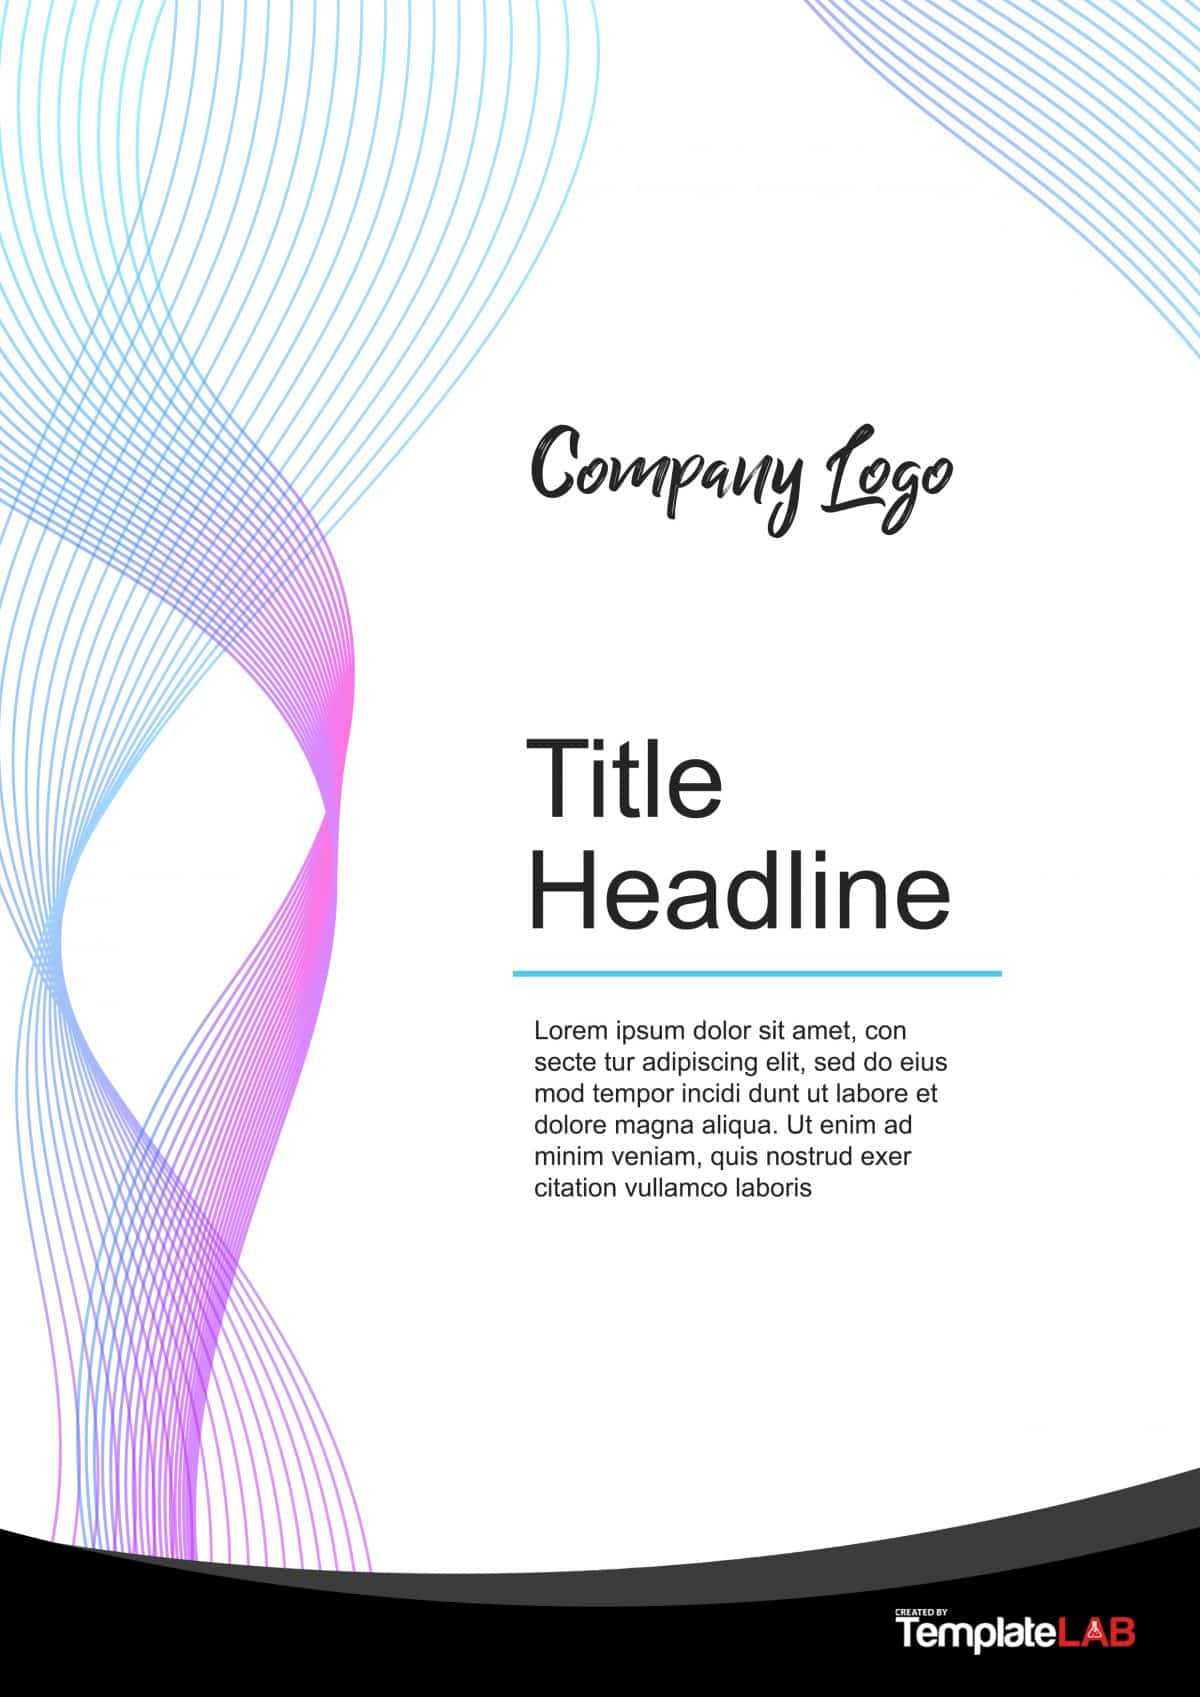 39 Amazing Cover Page Templates (Word + Psd) ᐅ Templatelab Intended For Word Title Page Templates